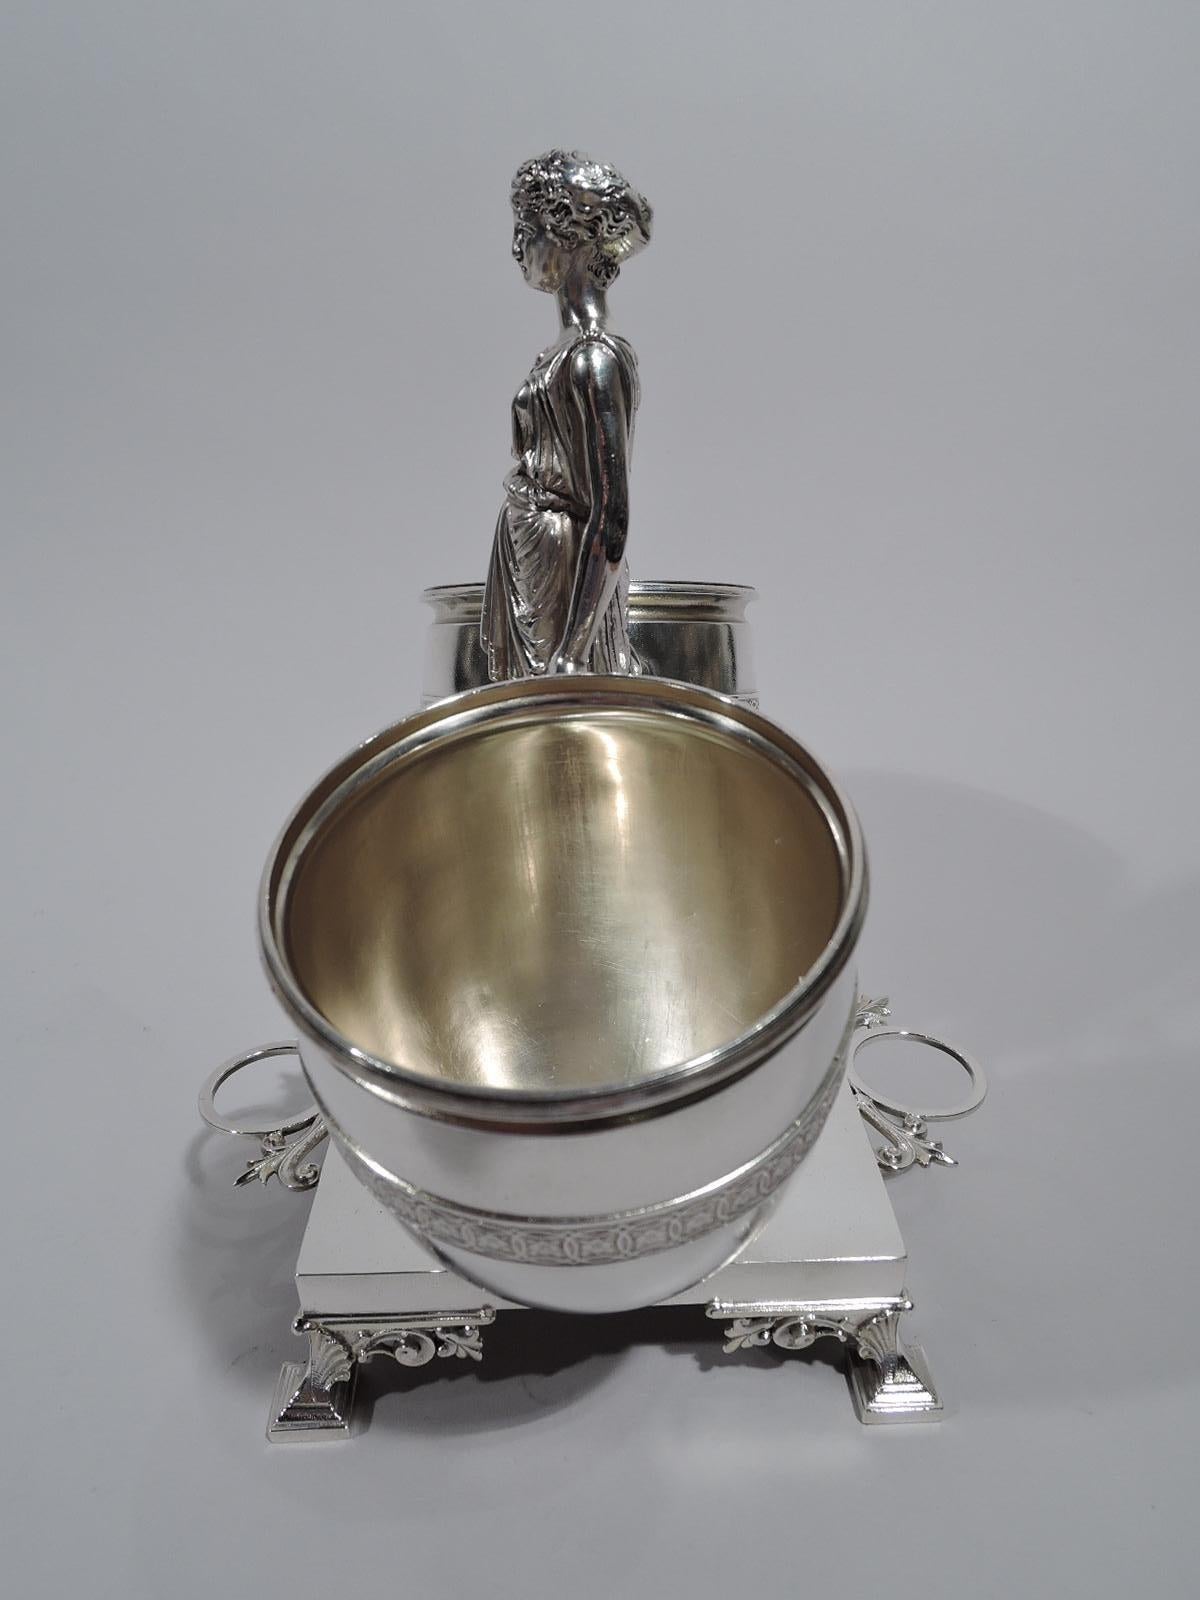 Classical sterling silver cigar holder. Made by JC Moore & Son for Tiffany & Co. in New York. The cast-figure of a draped and barefooted maiden standing on pedestal and gripping two oversized amphoras with gilt-washed interior and rosette-inset